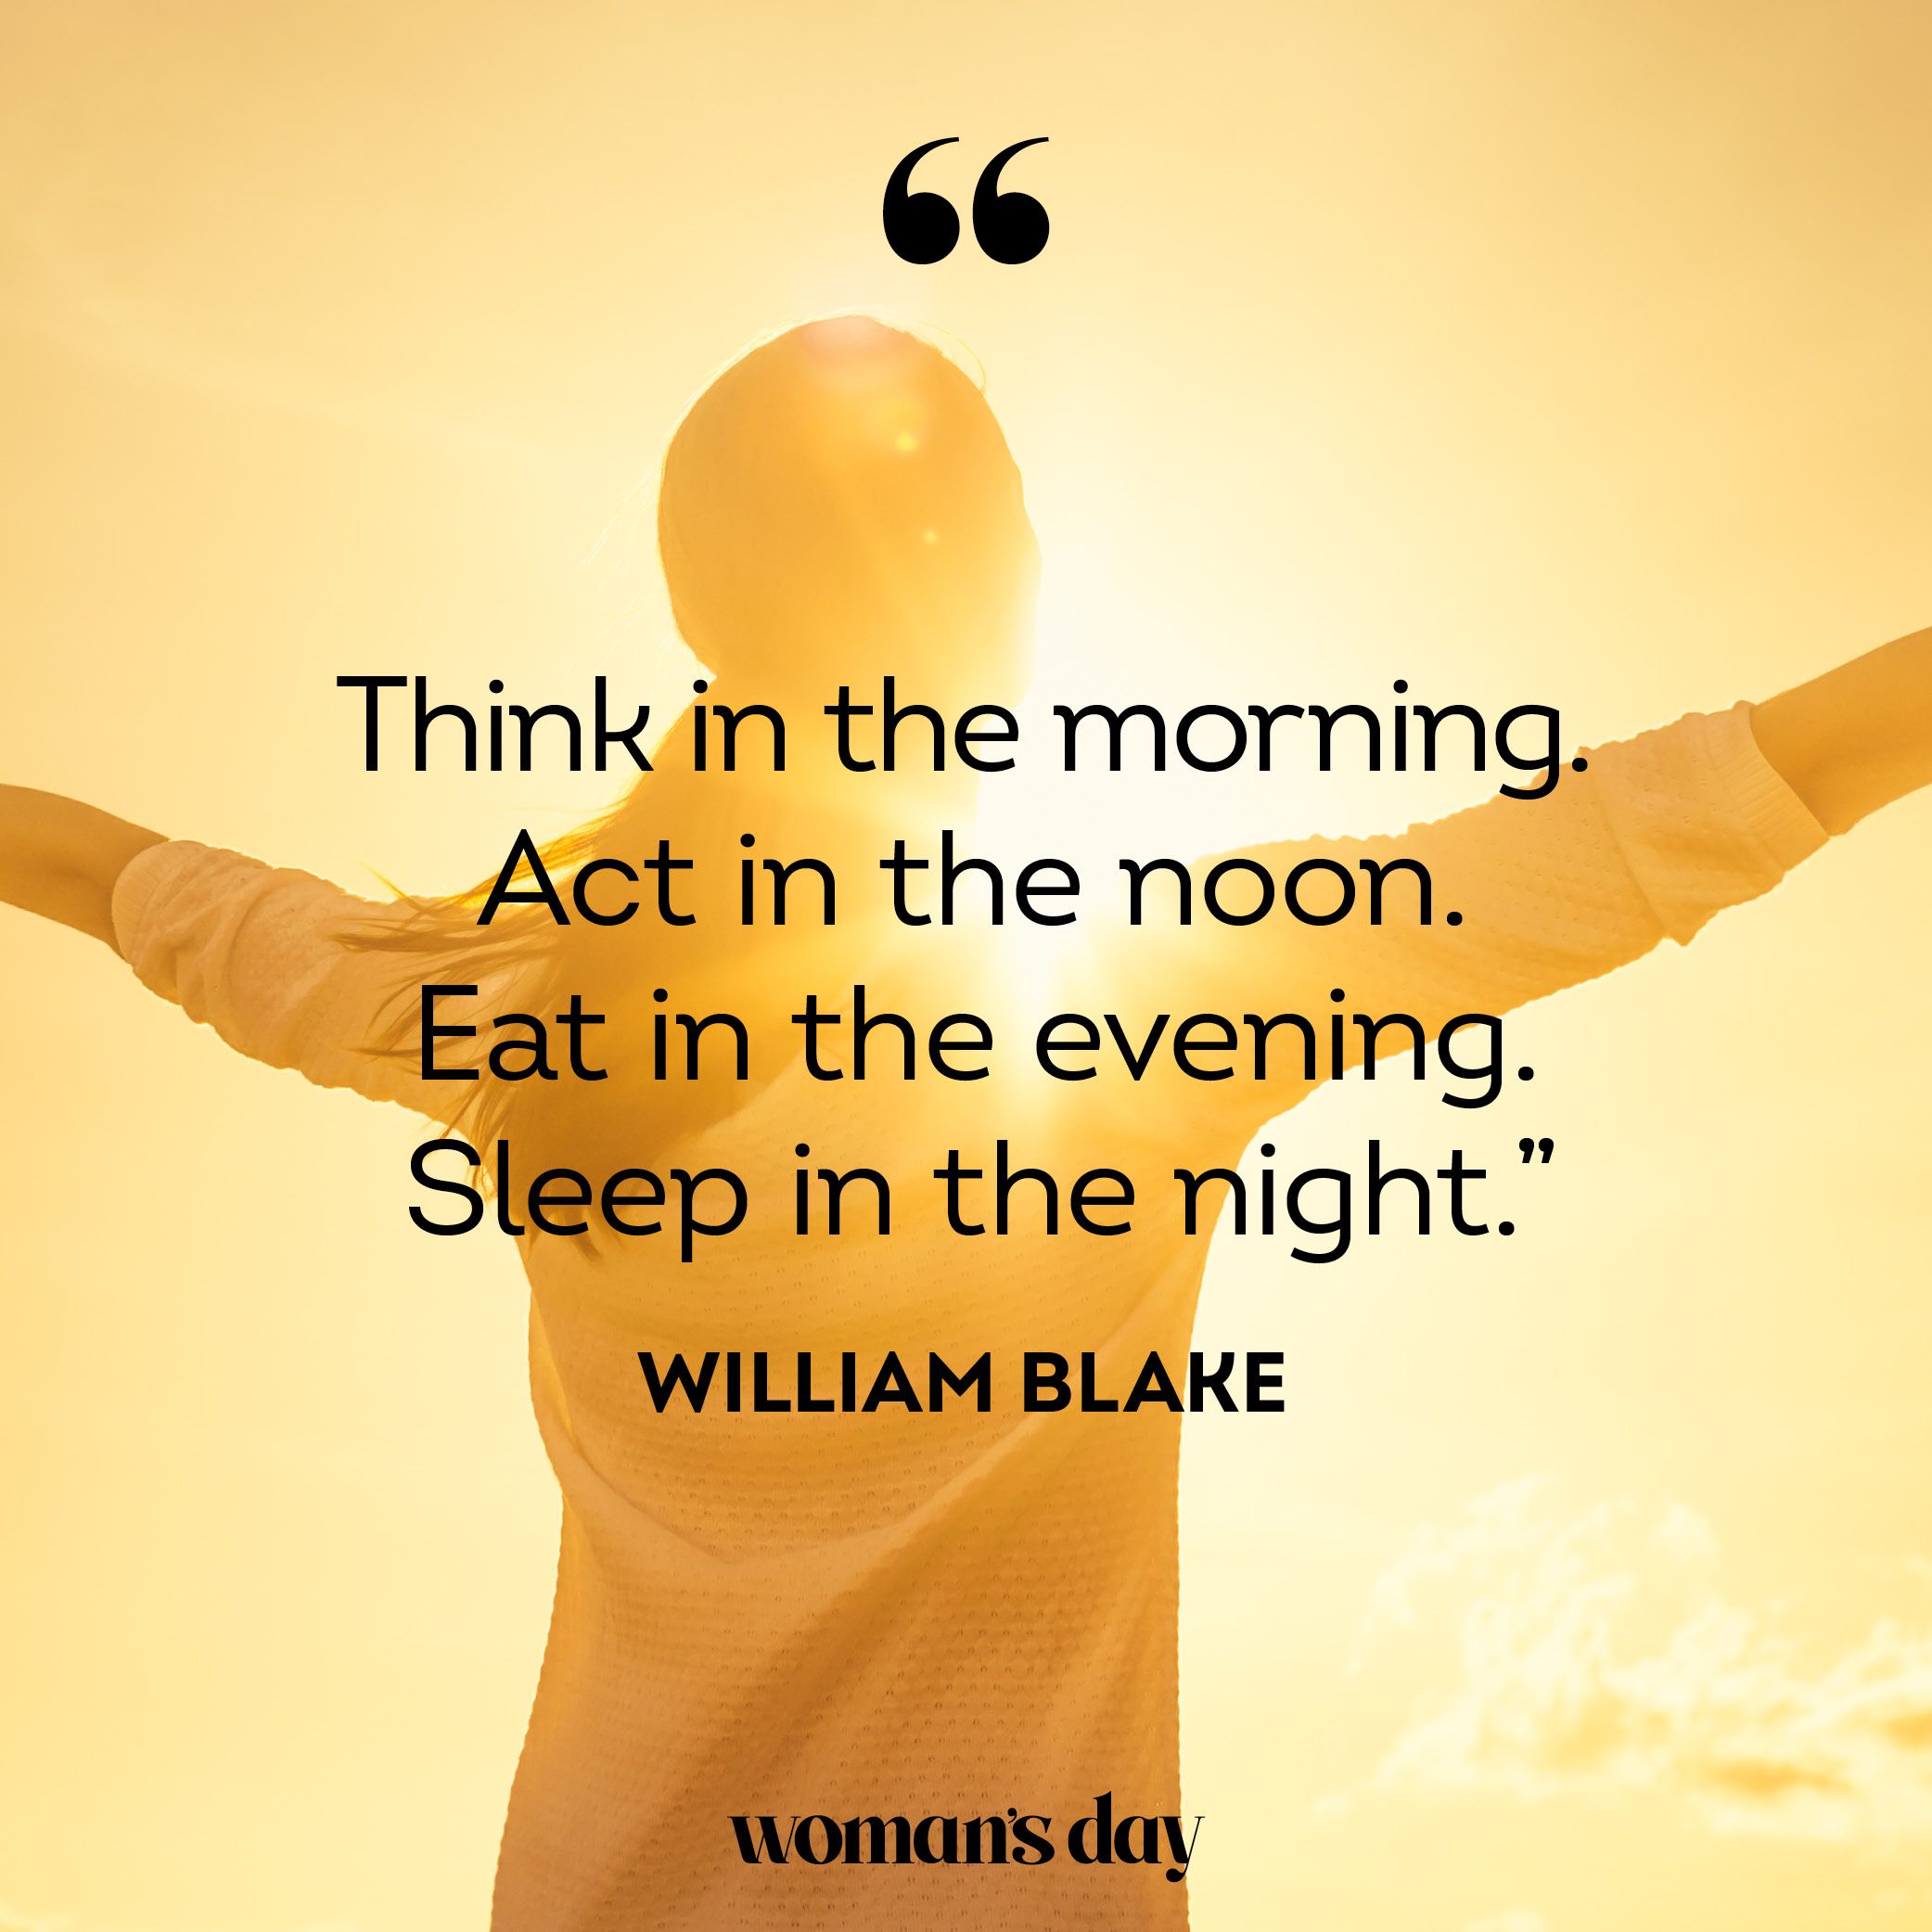 150 Good Morning Quotes To Start Your Day Motivational Morning Sayings About Love And Success